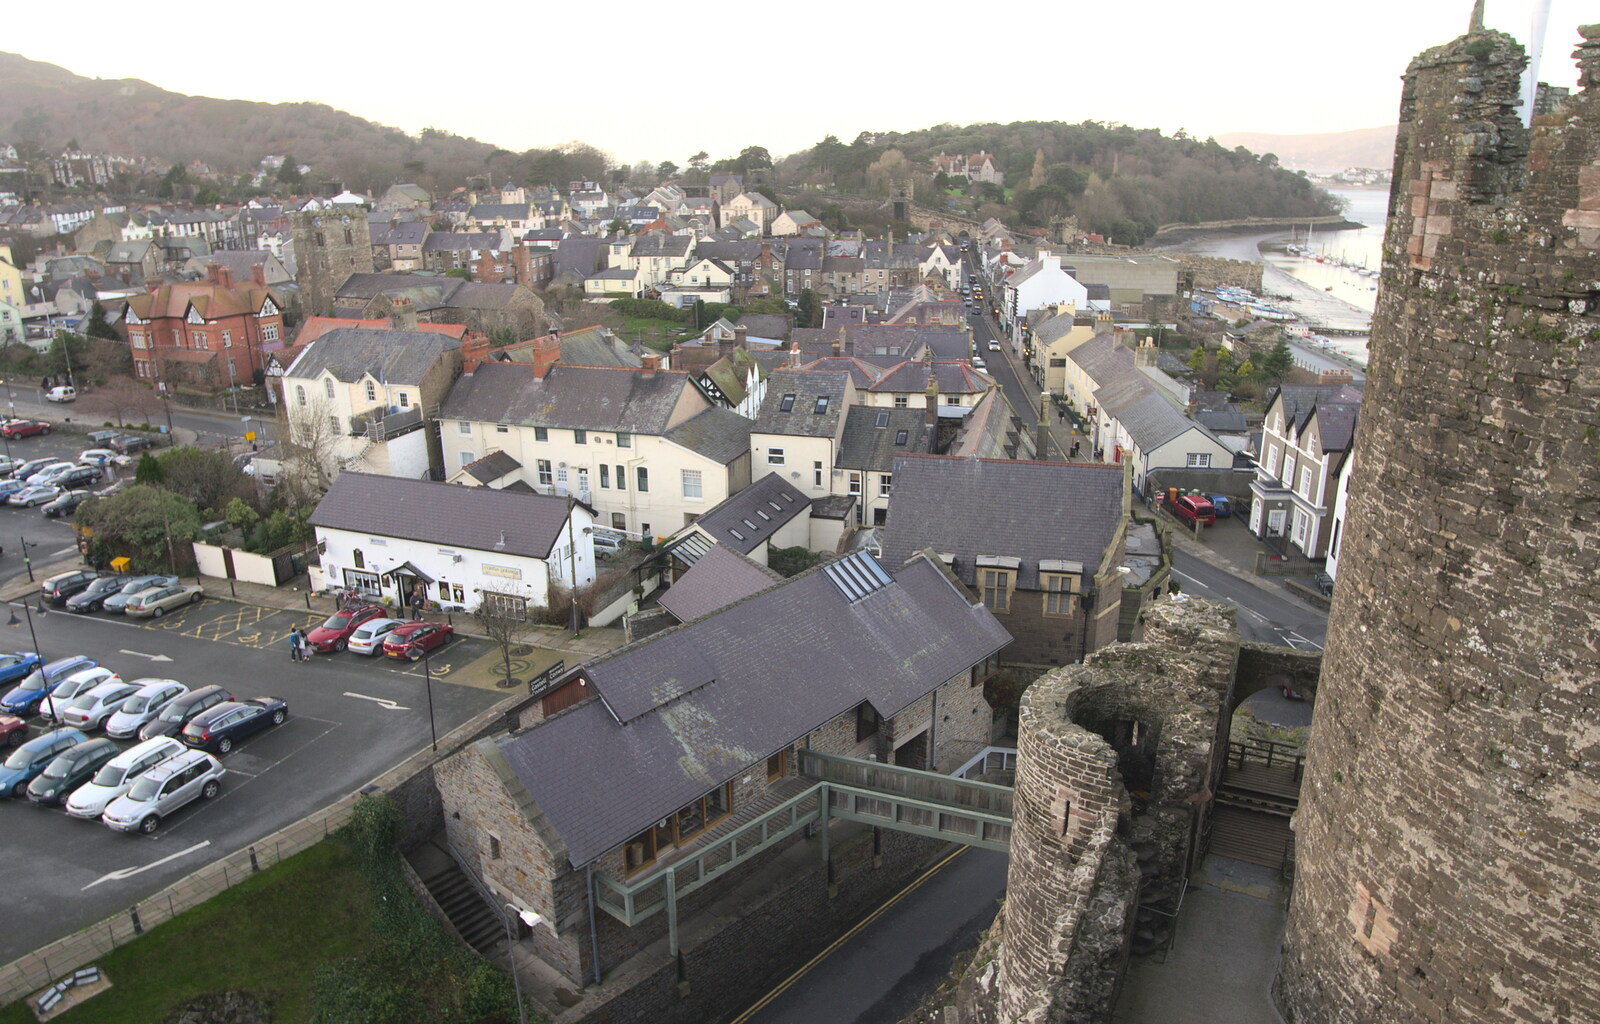 A view over the town from Conwy, Holyhead and the Ferry to Ireland - 21st December 2015